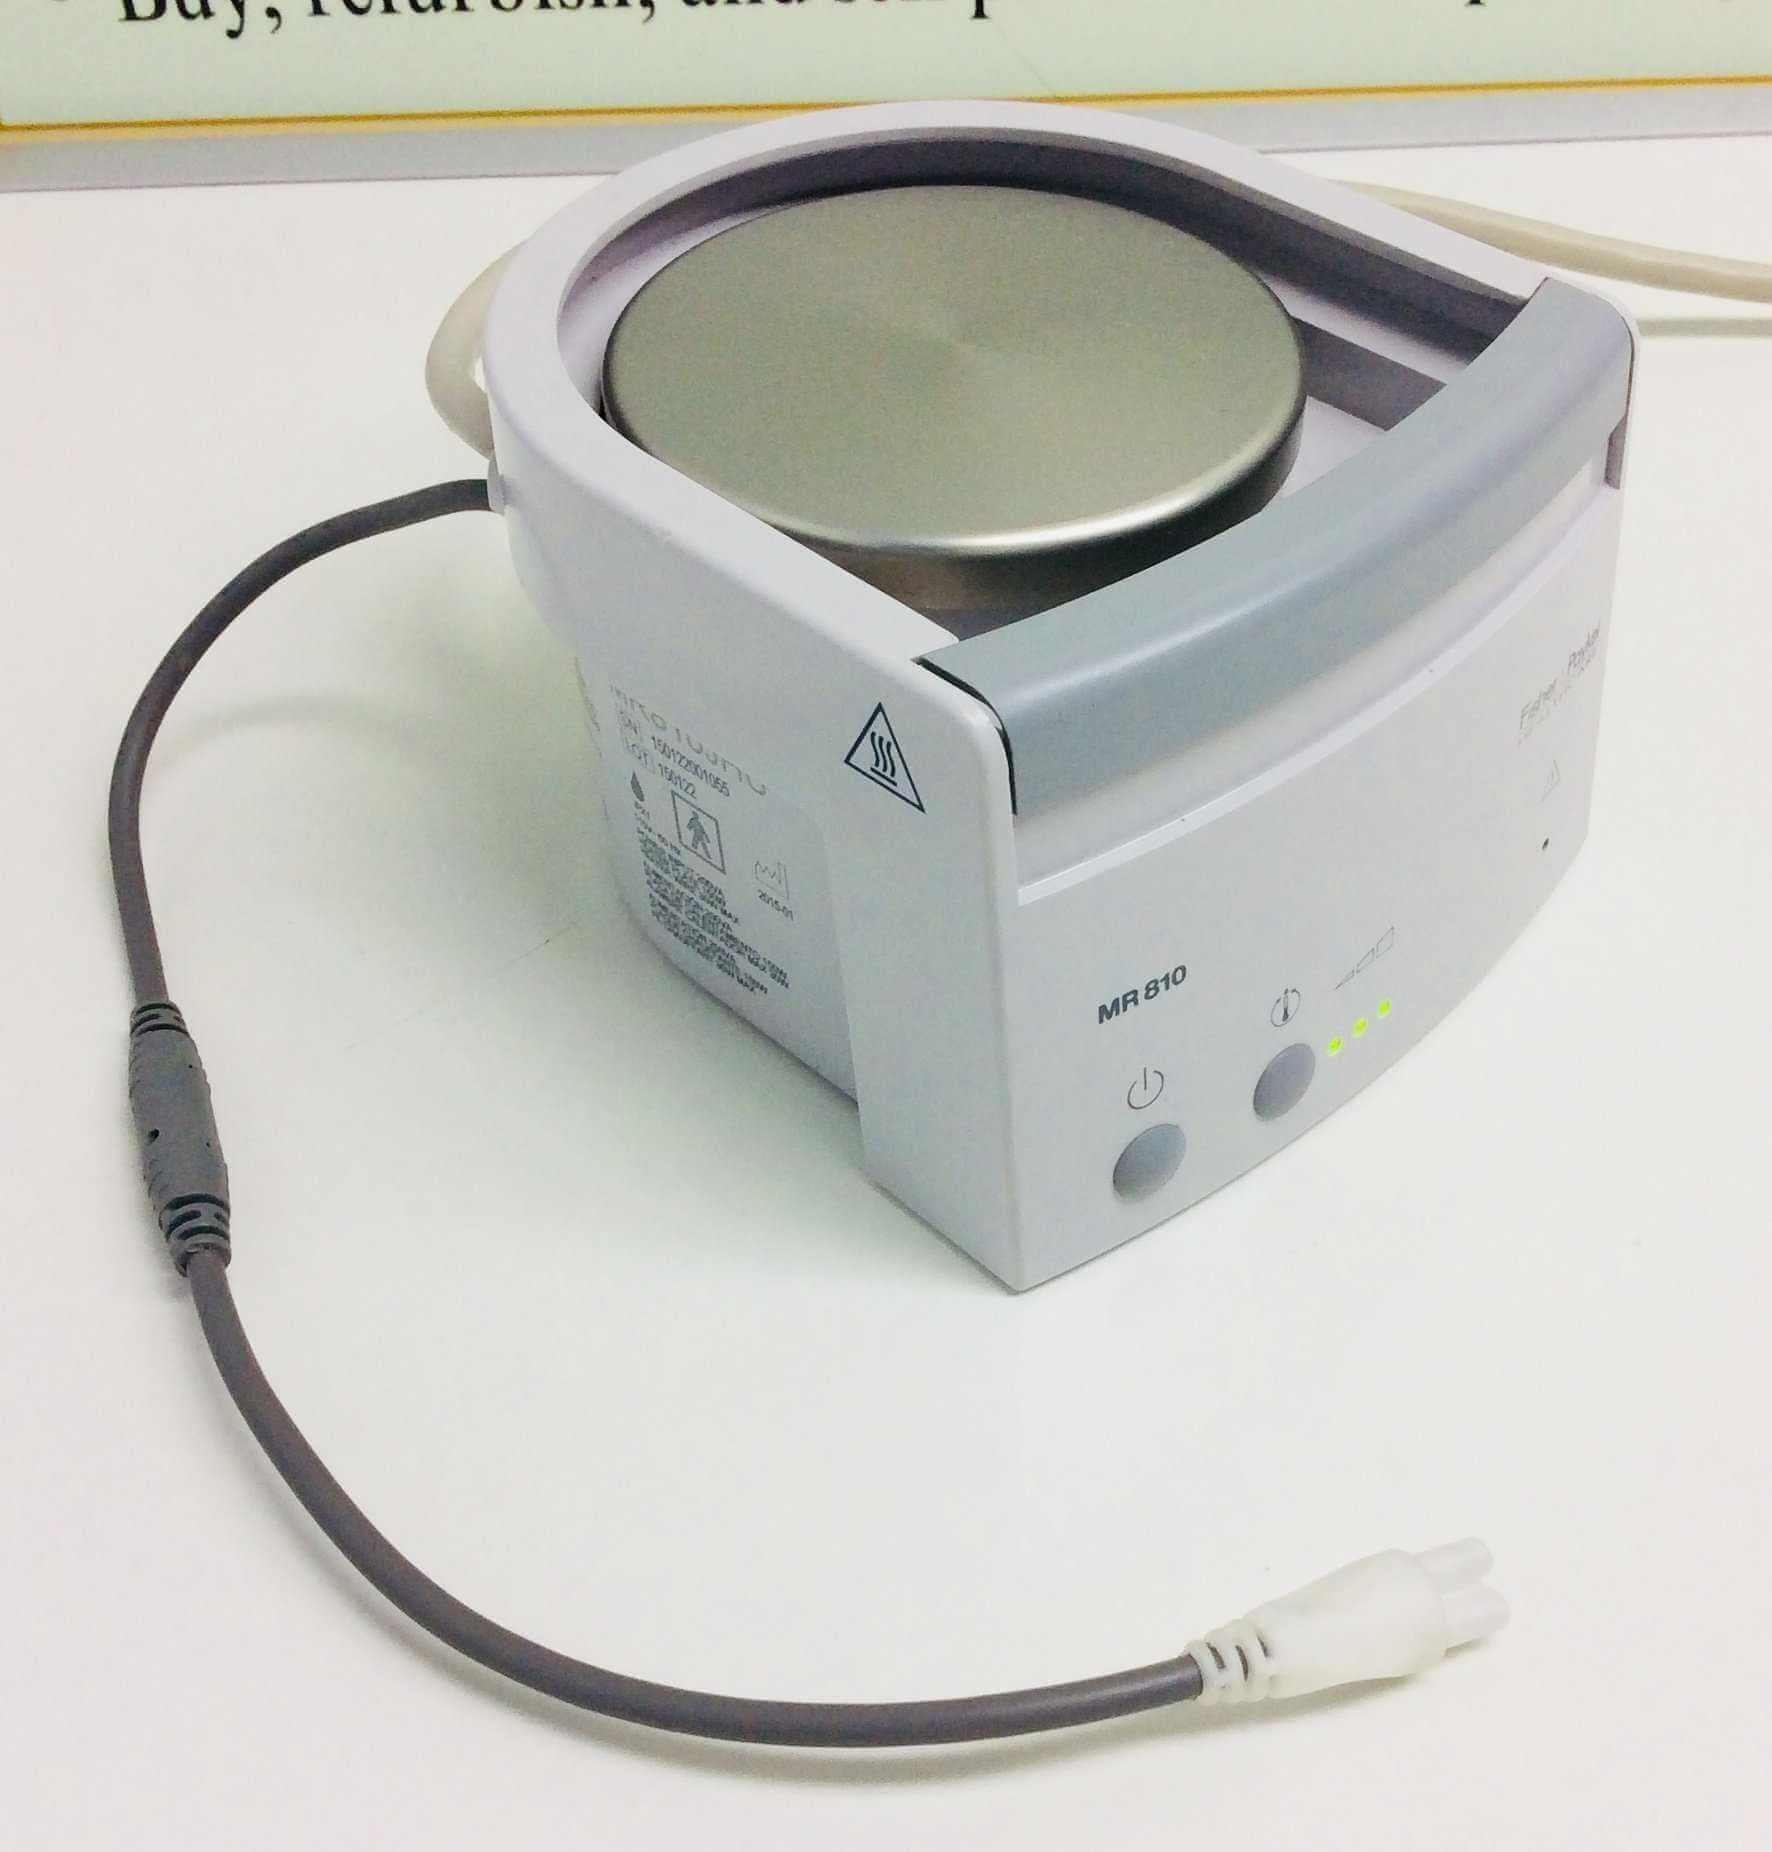 USED Fisher and Paykel MR810 Heated Respiratory Humidifier 150122 Warranty FREE Shipping - MBR Medicals